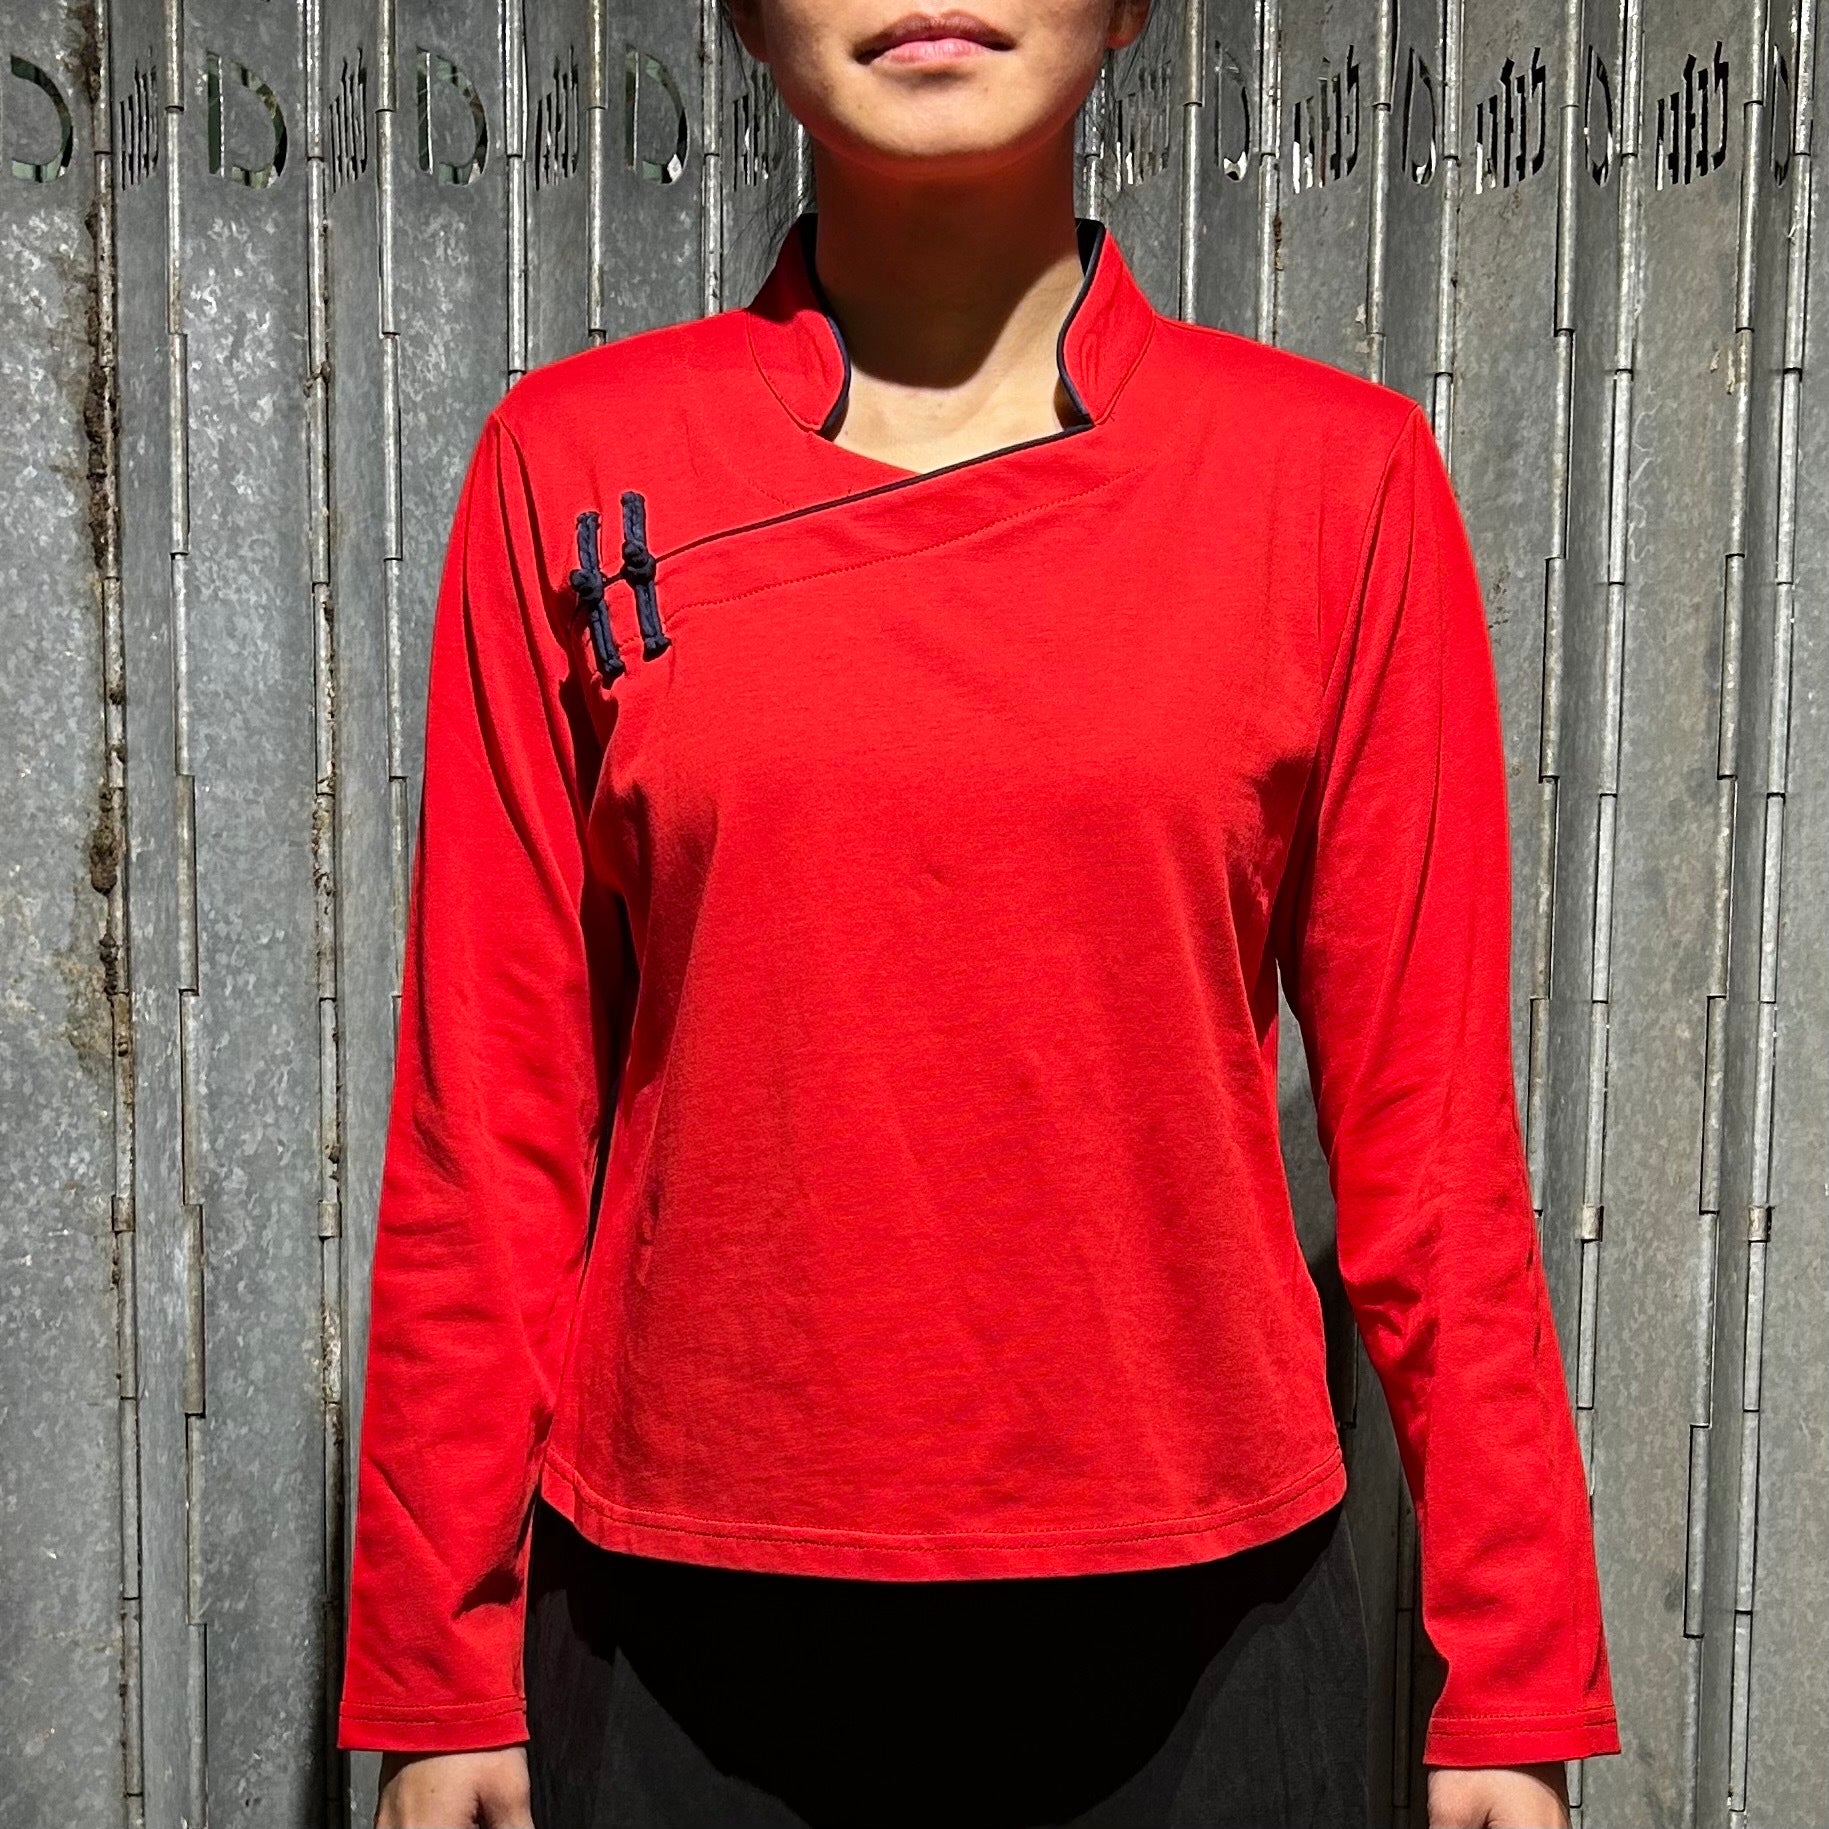 Long Sleeve Qipolo Top, Red